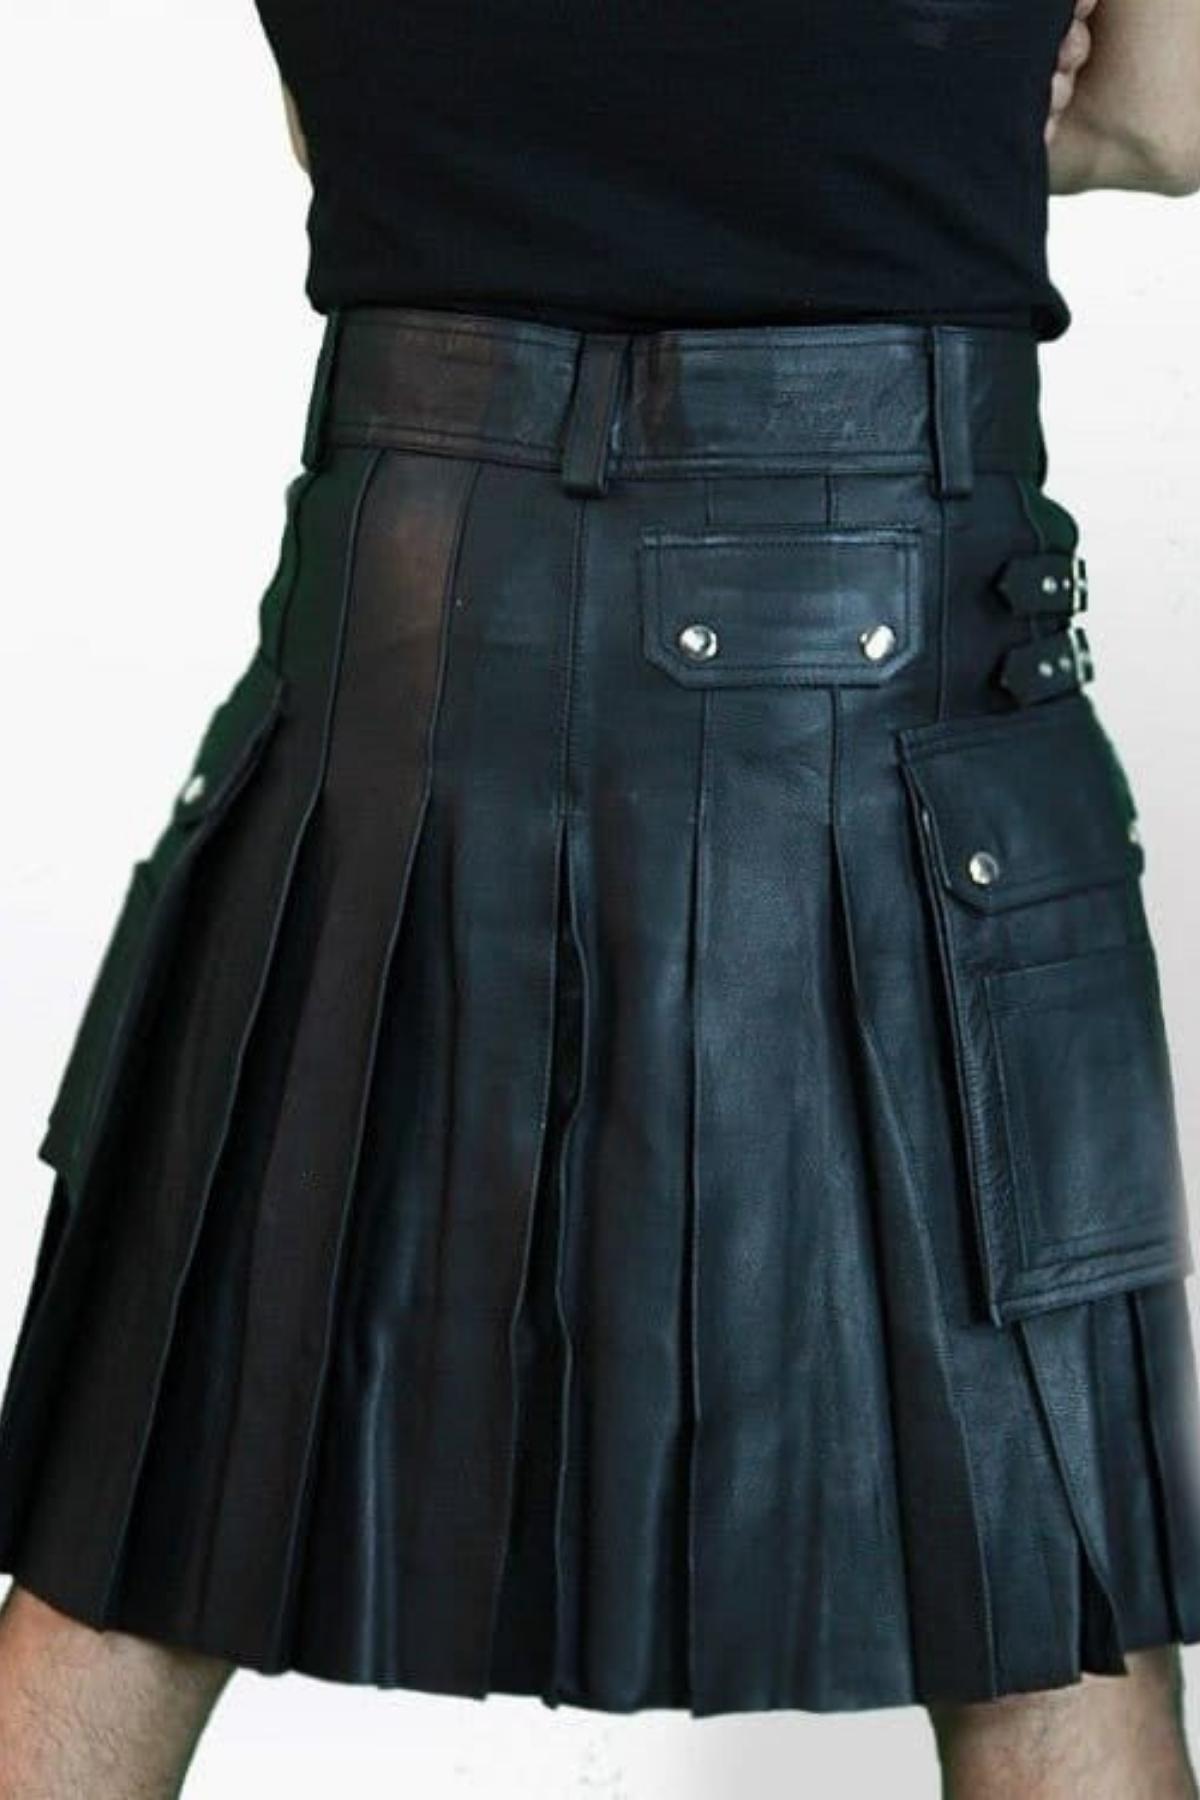  Classy Cargo Leather Kilt - Back Side View